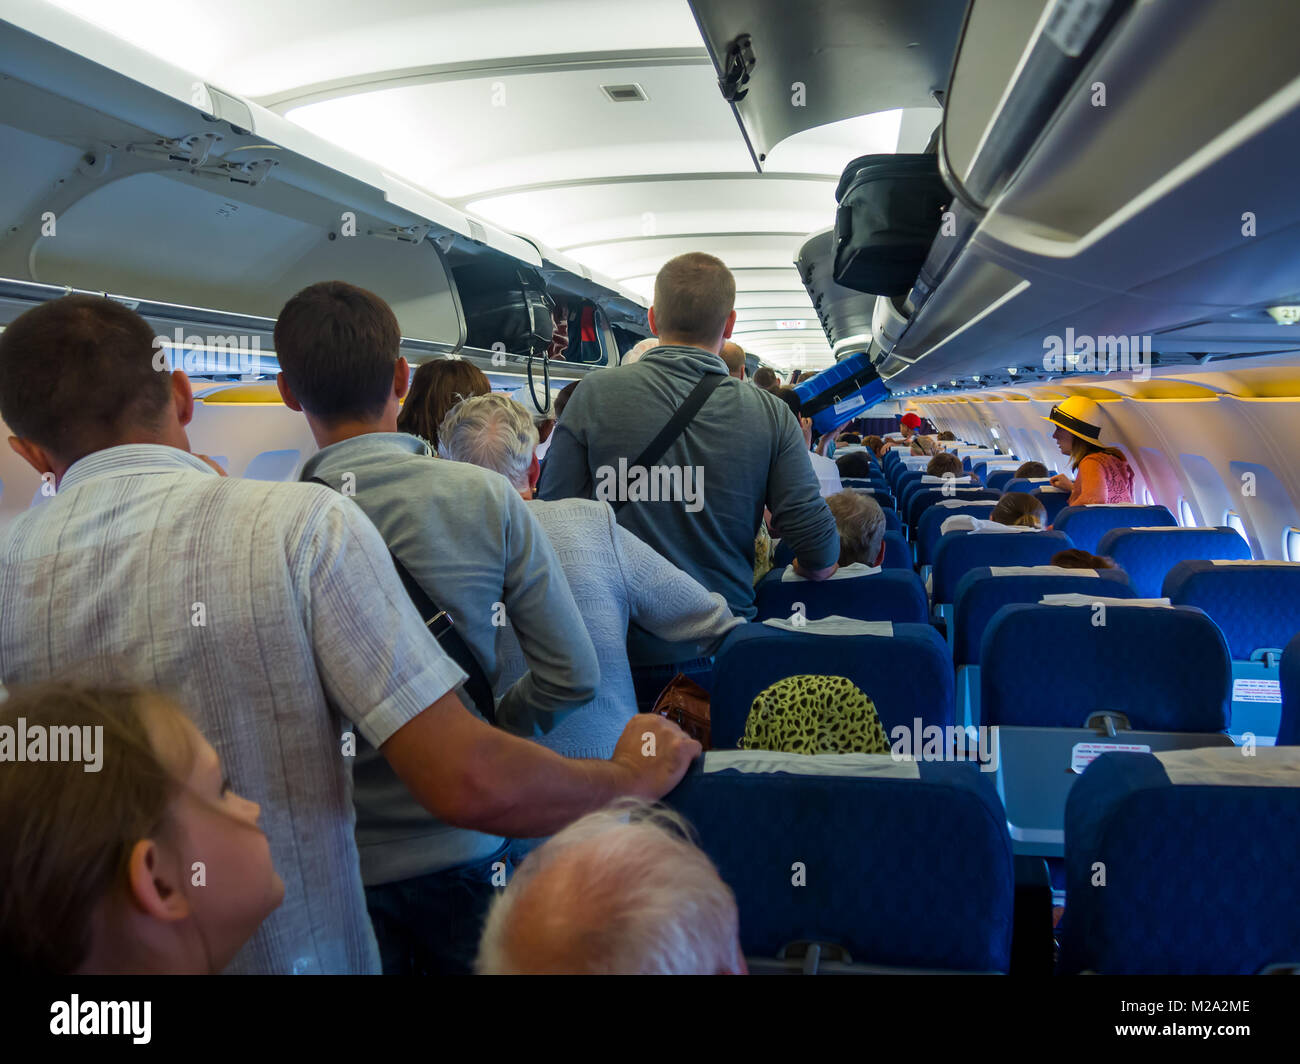 Simferopol, Russia - June 15, 2016: Passengers expect exit the aircraft after landing Stock Photo